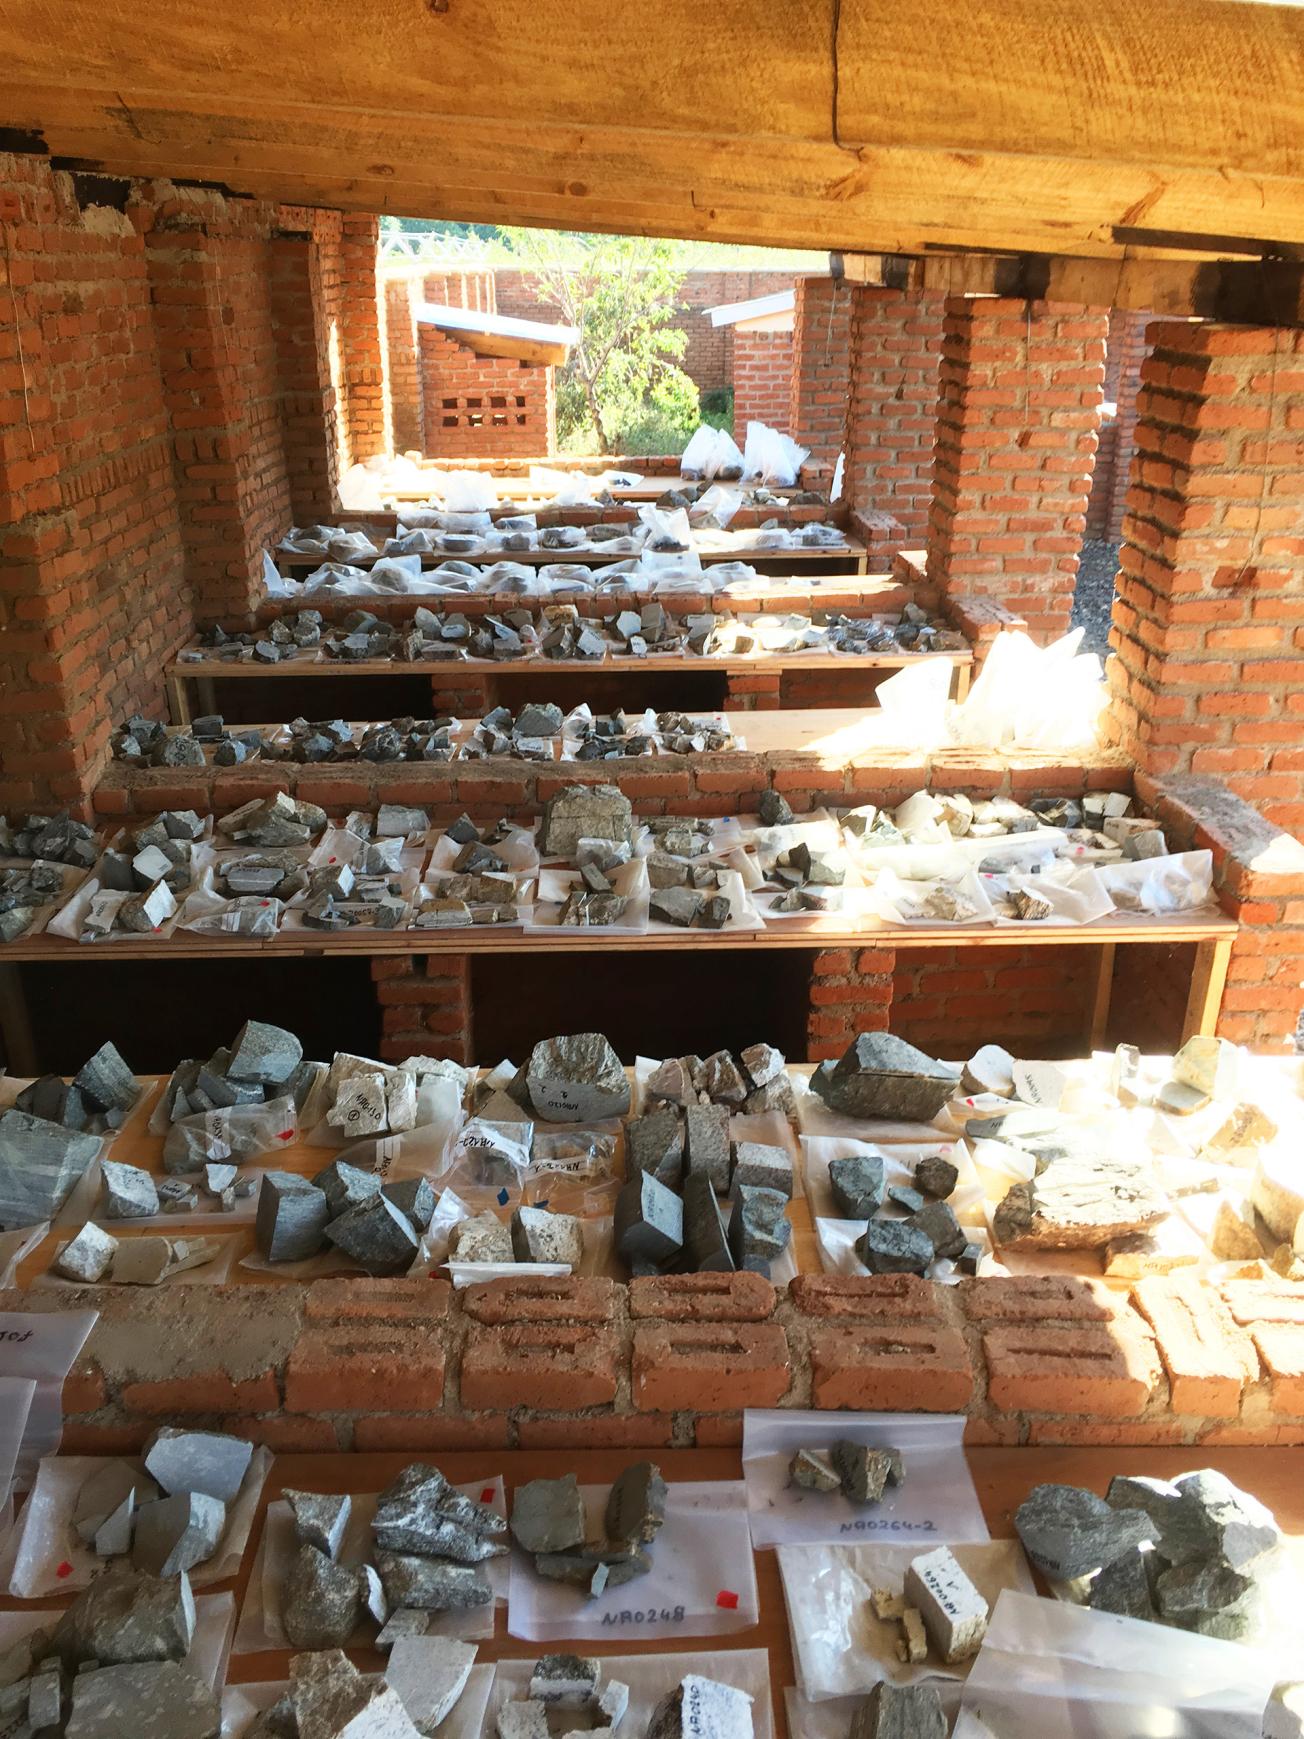 Malawi - inventory of mineral occurrences.